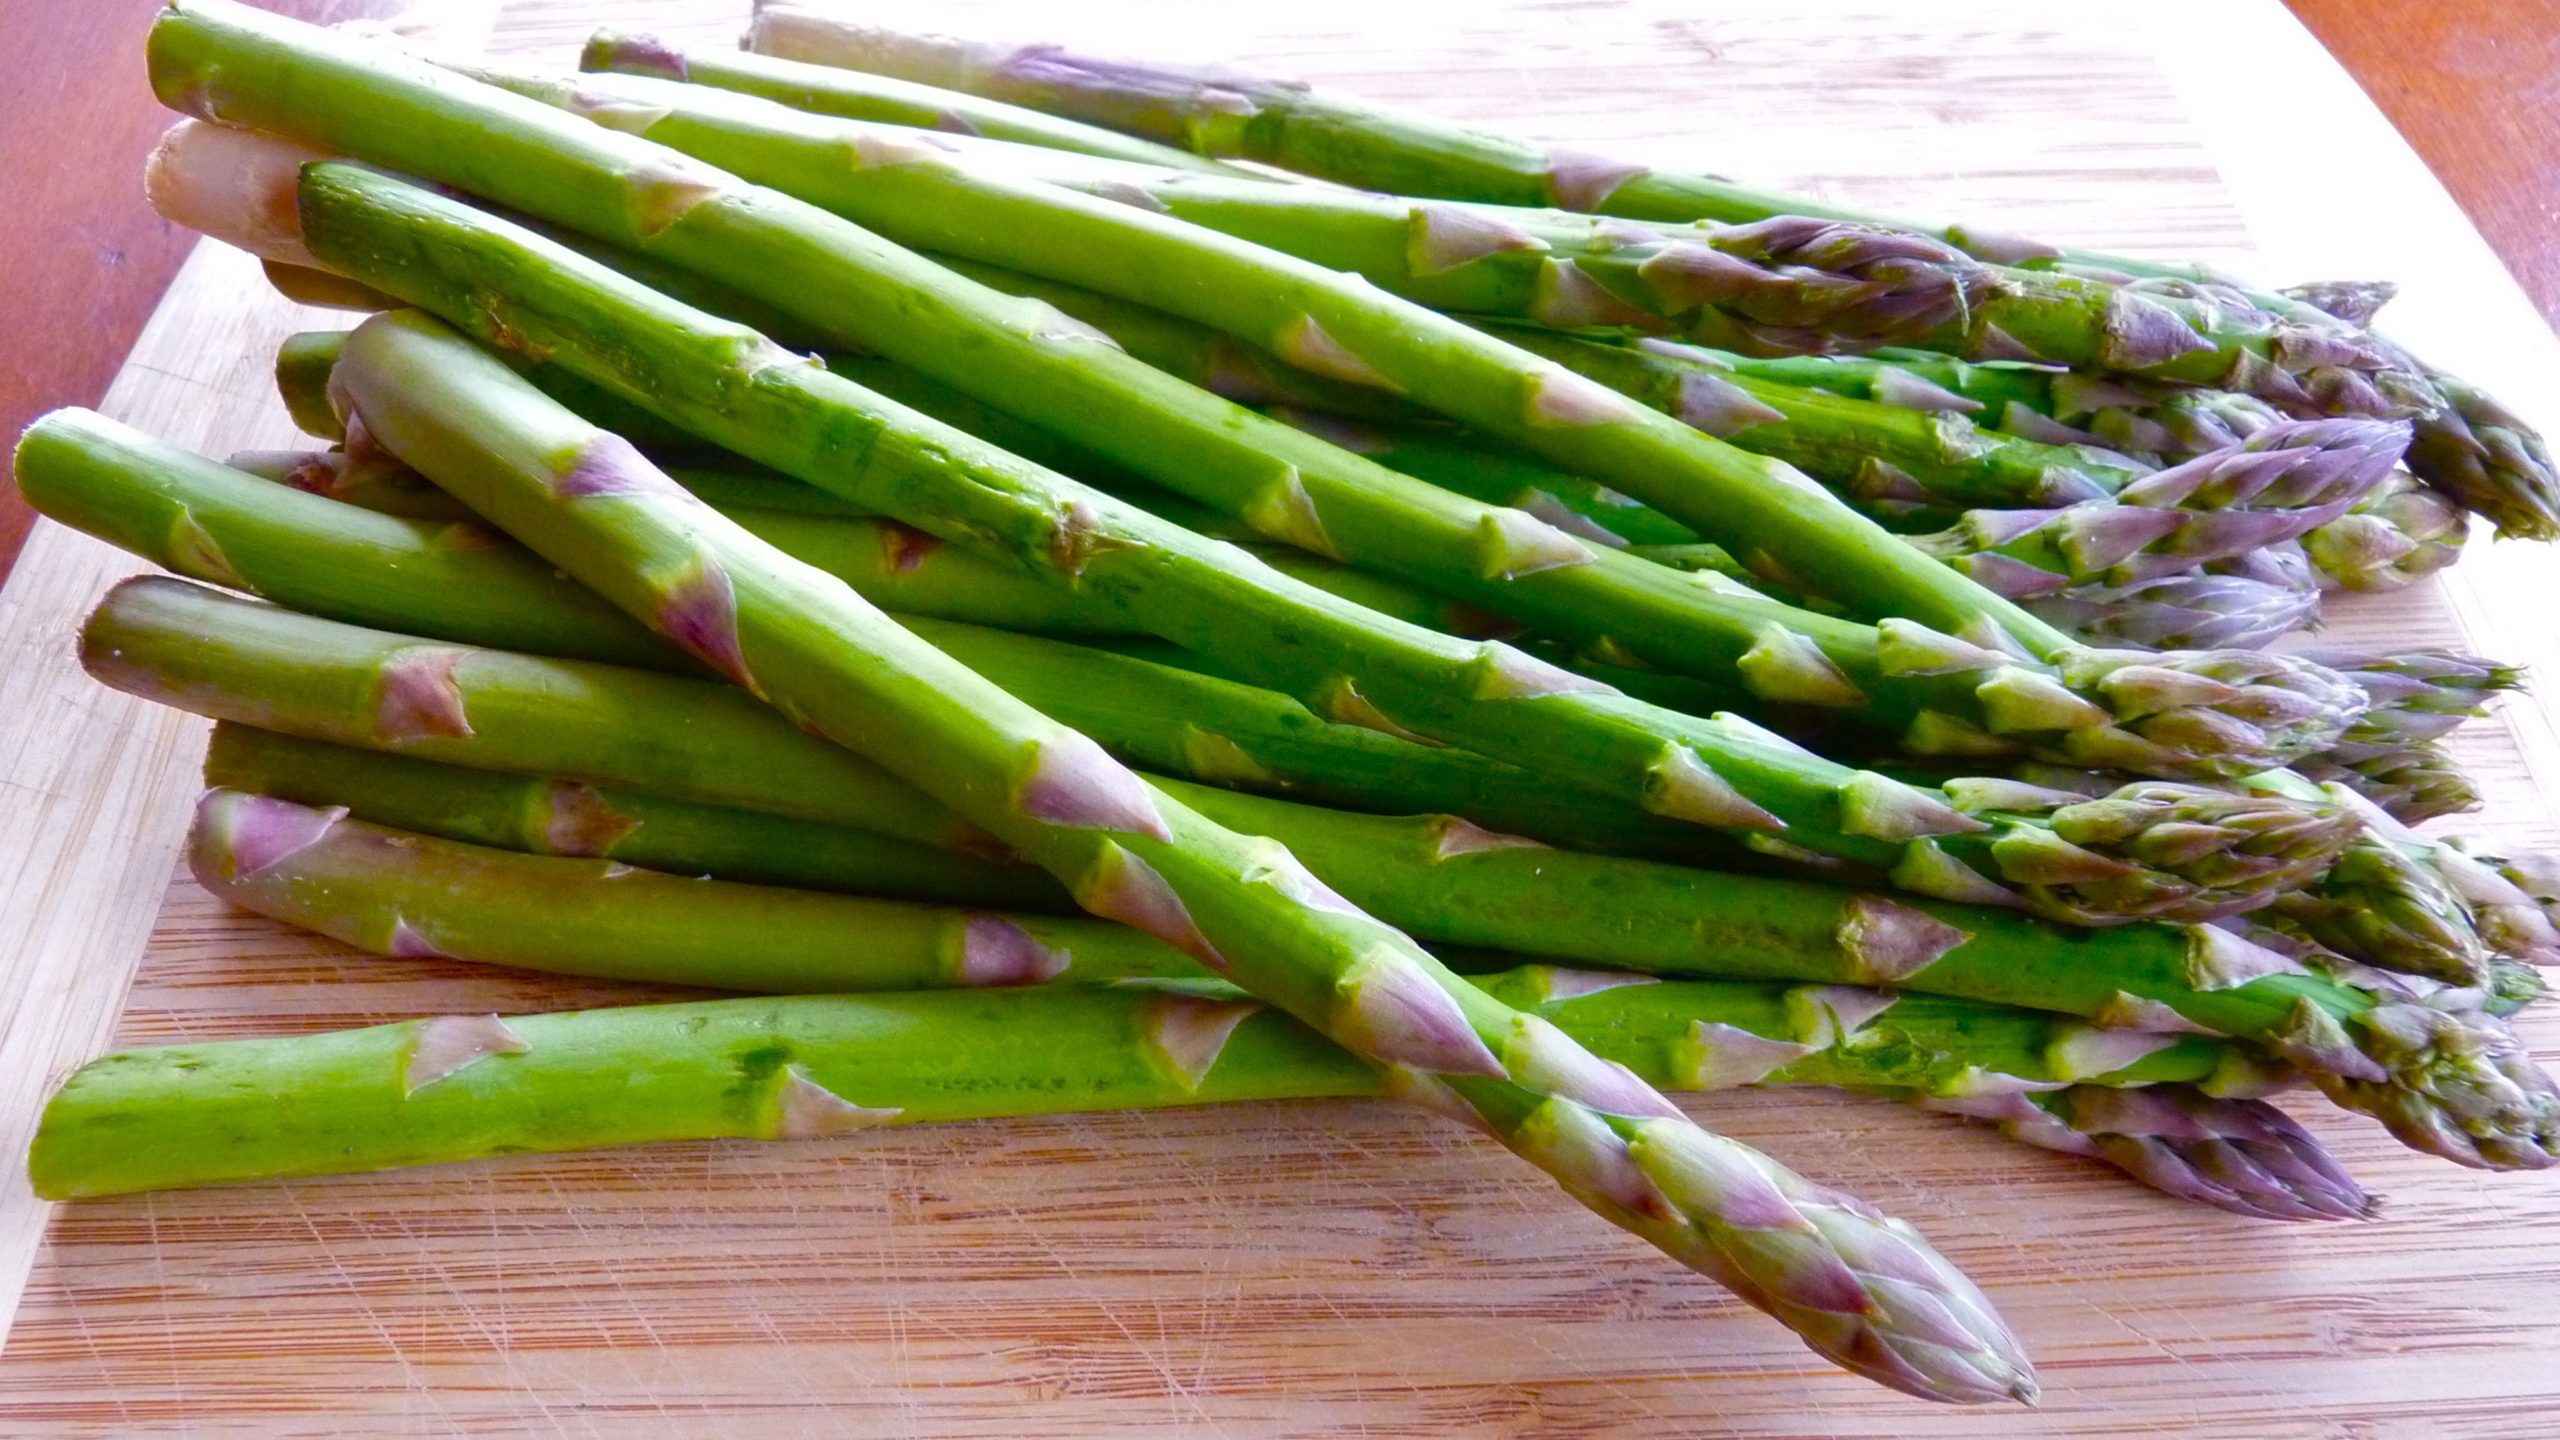 Asparagus harvesting stopped due to a COVID-19 outbreak in Ontario Canada